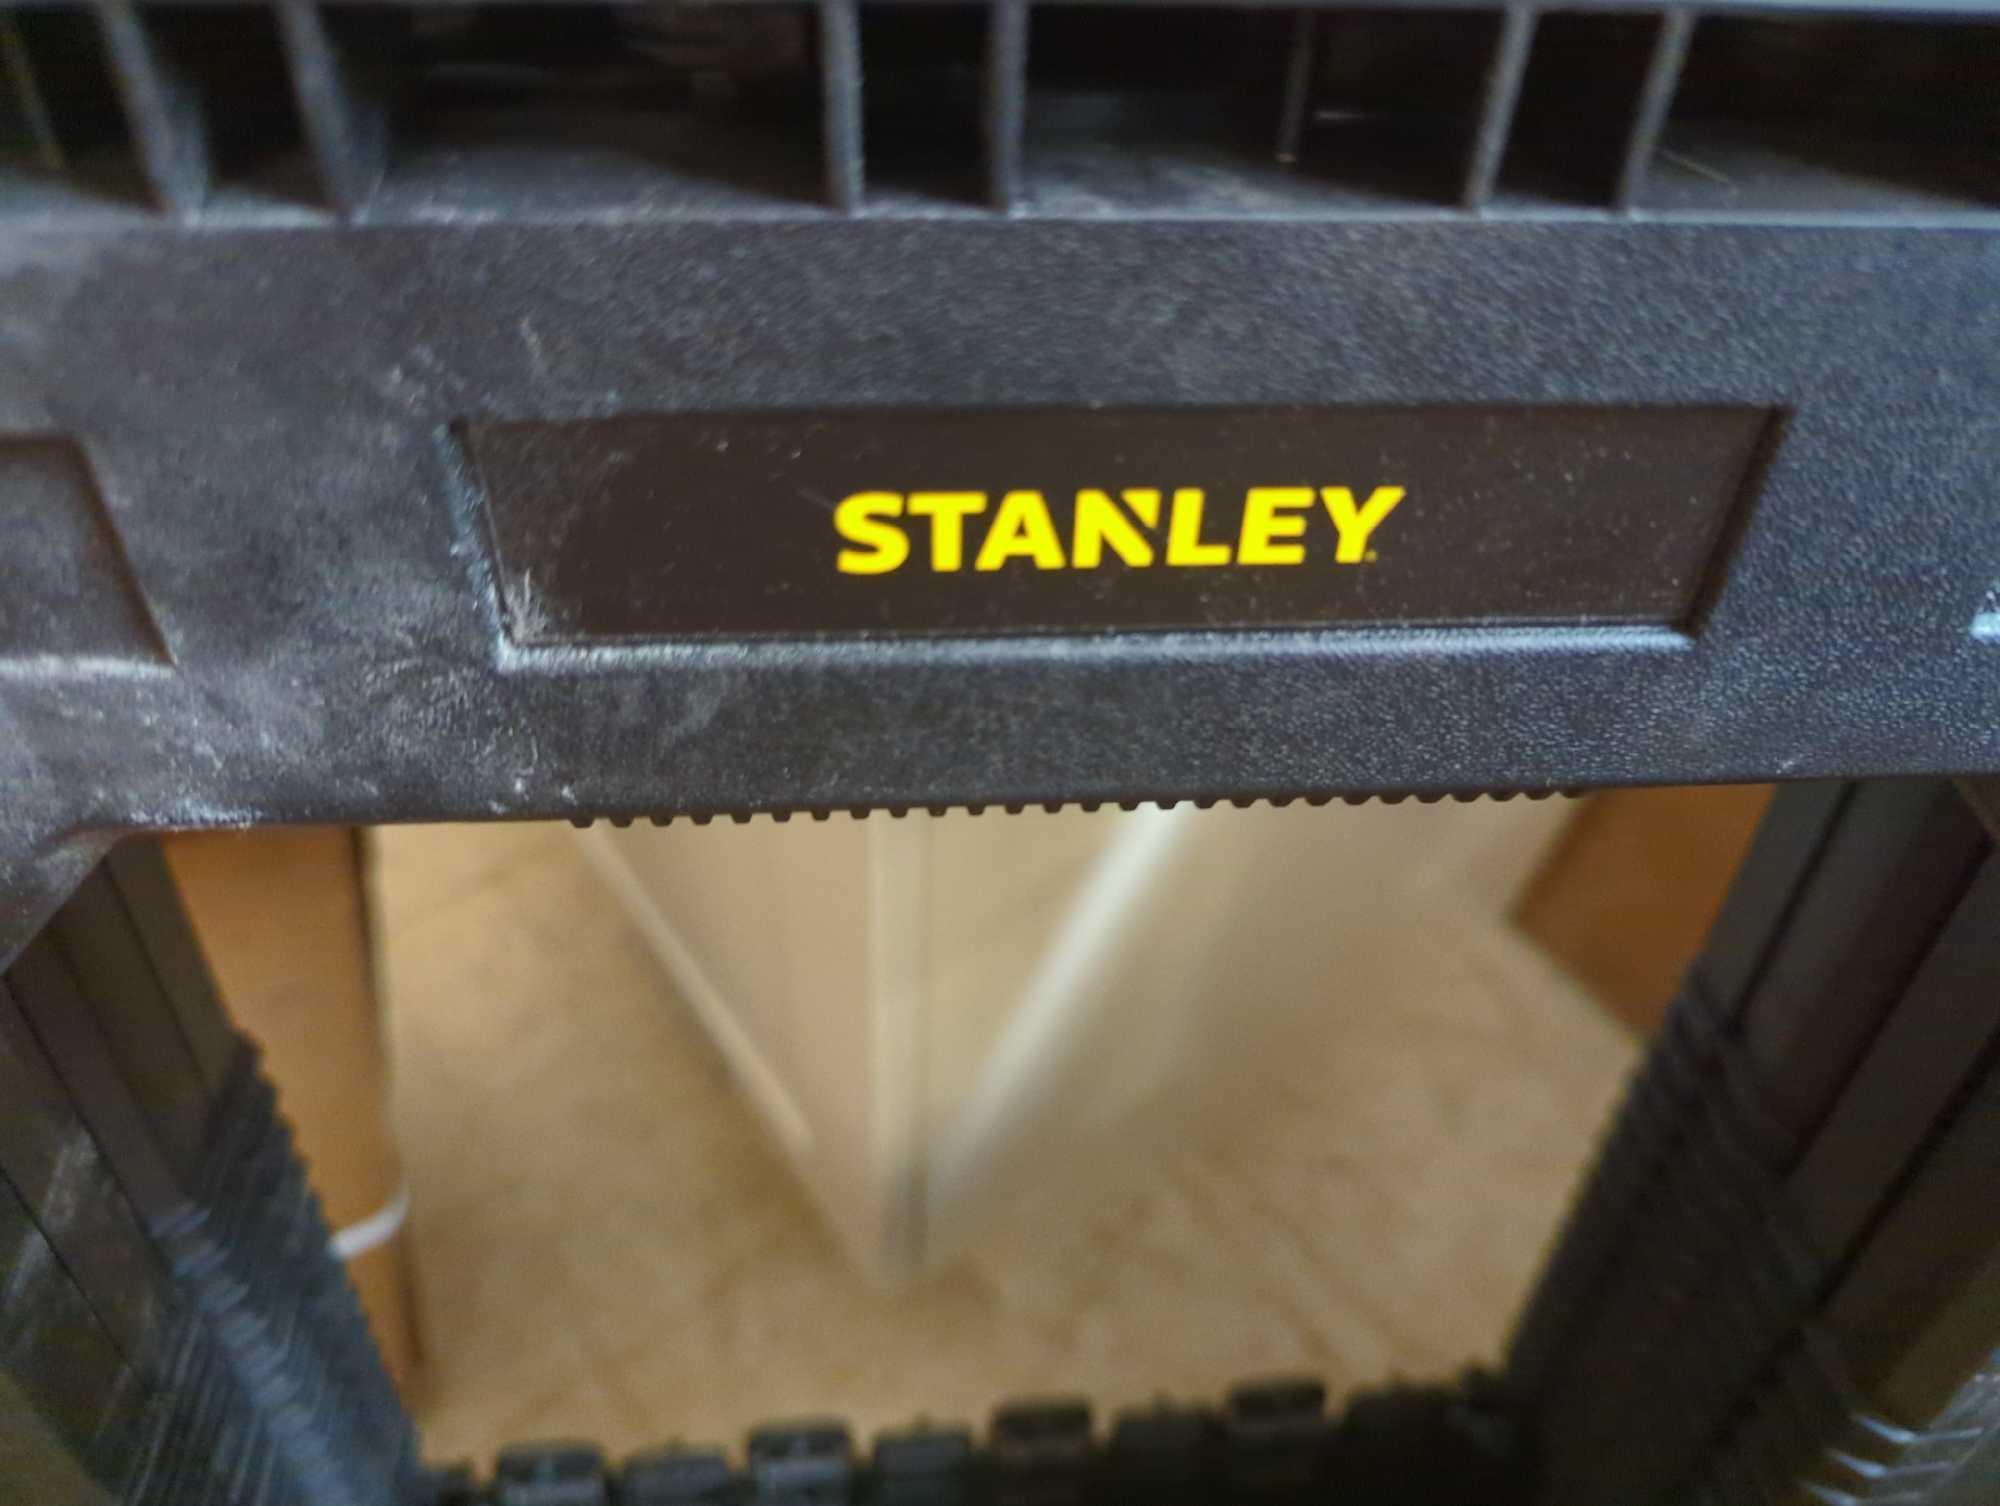 Stanley 31 in. H Plastic Folding Sawhorse (2 Pack), Appears to be Used Has some Marks on them,